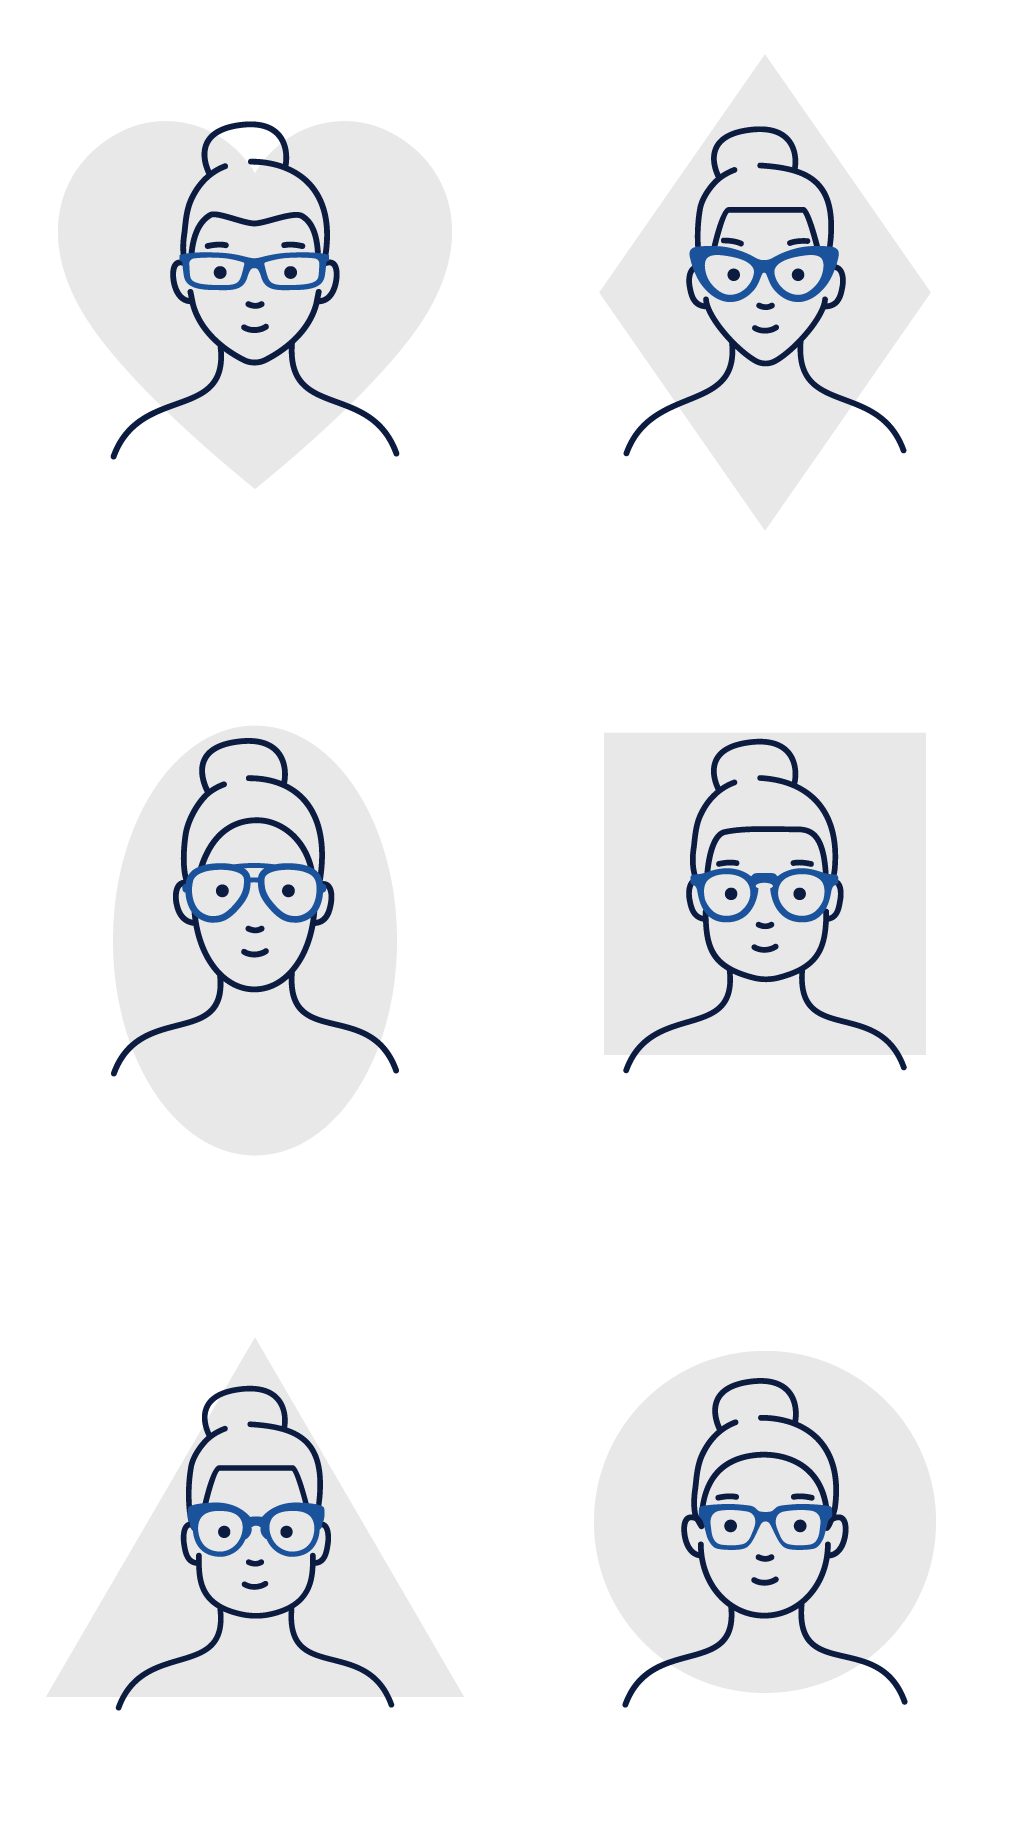 Illustration of various face shapes - women